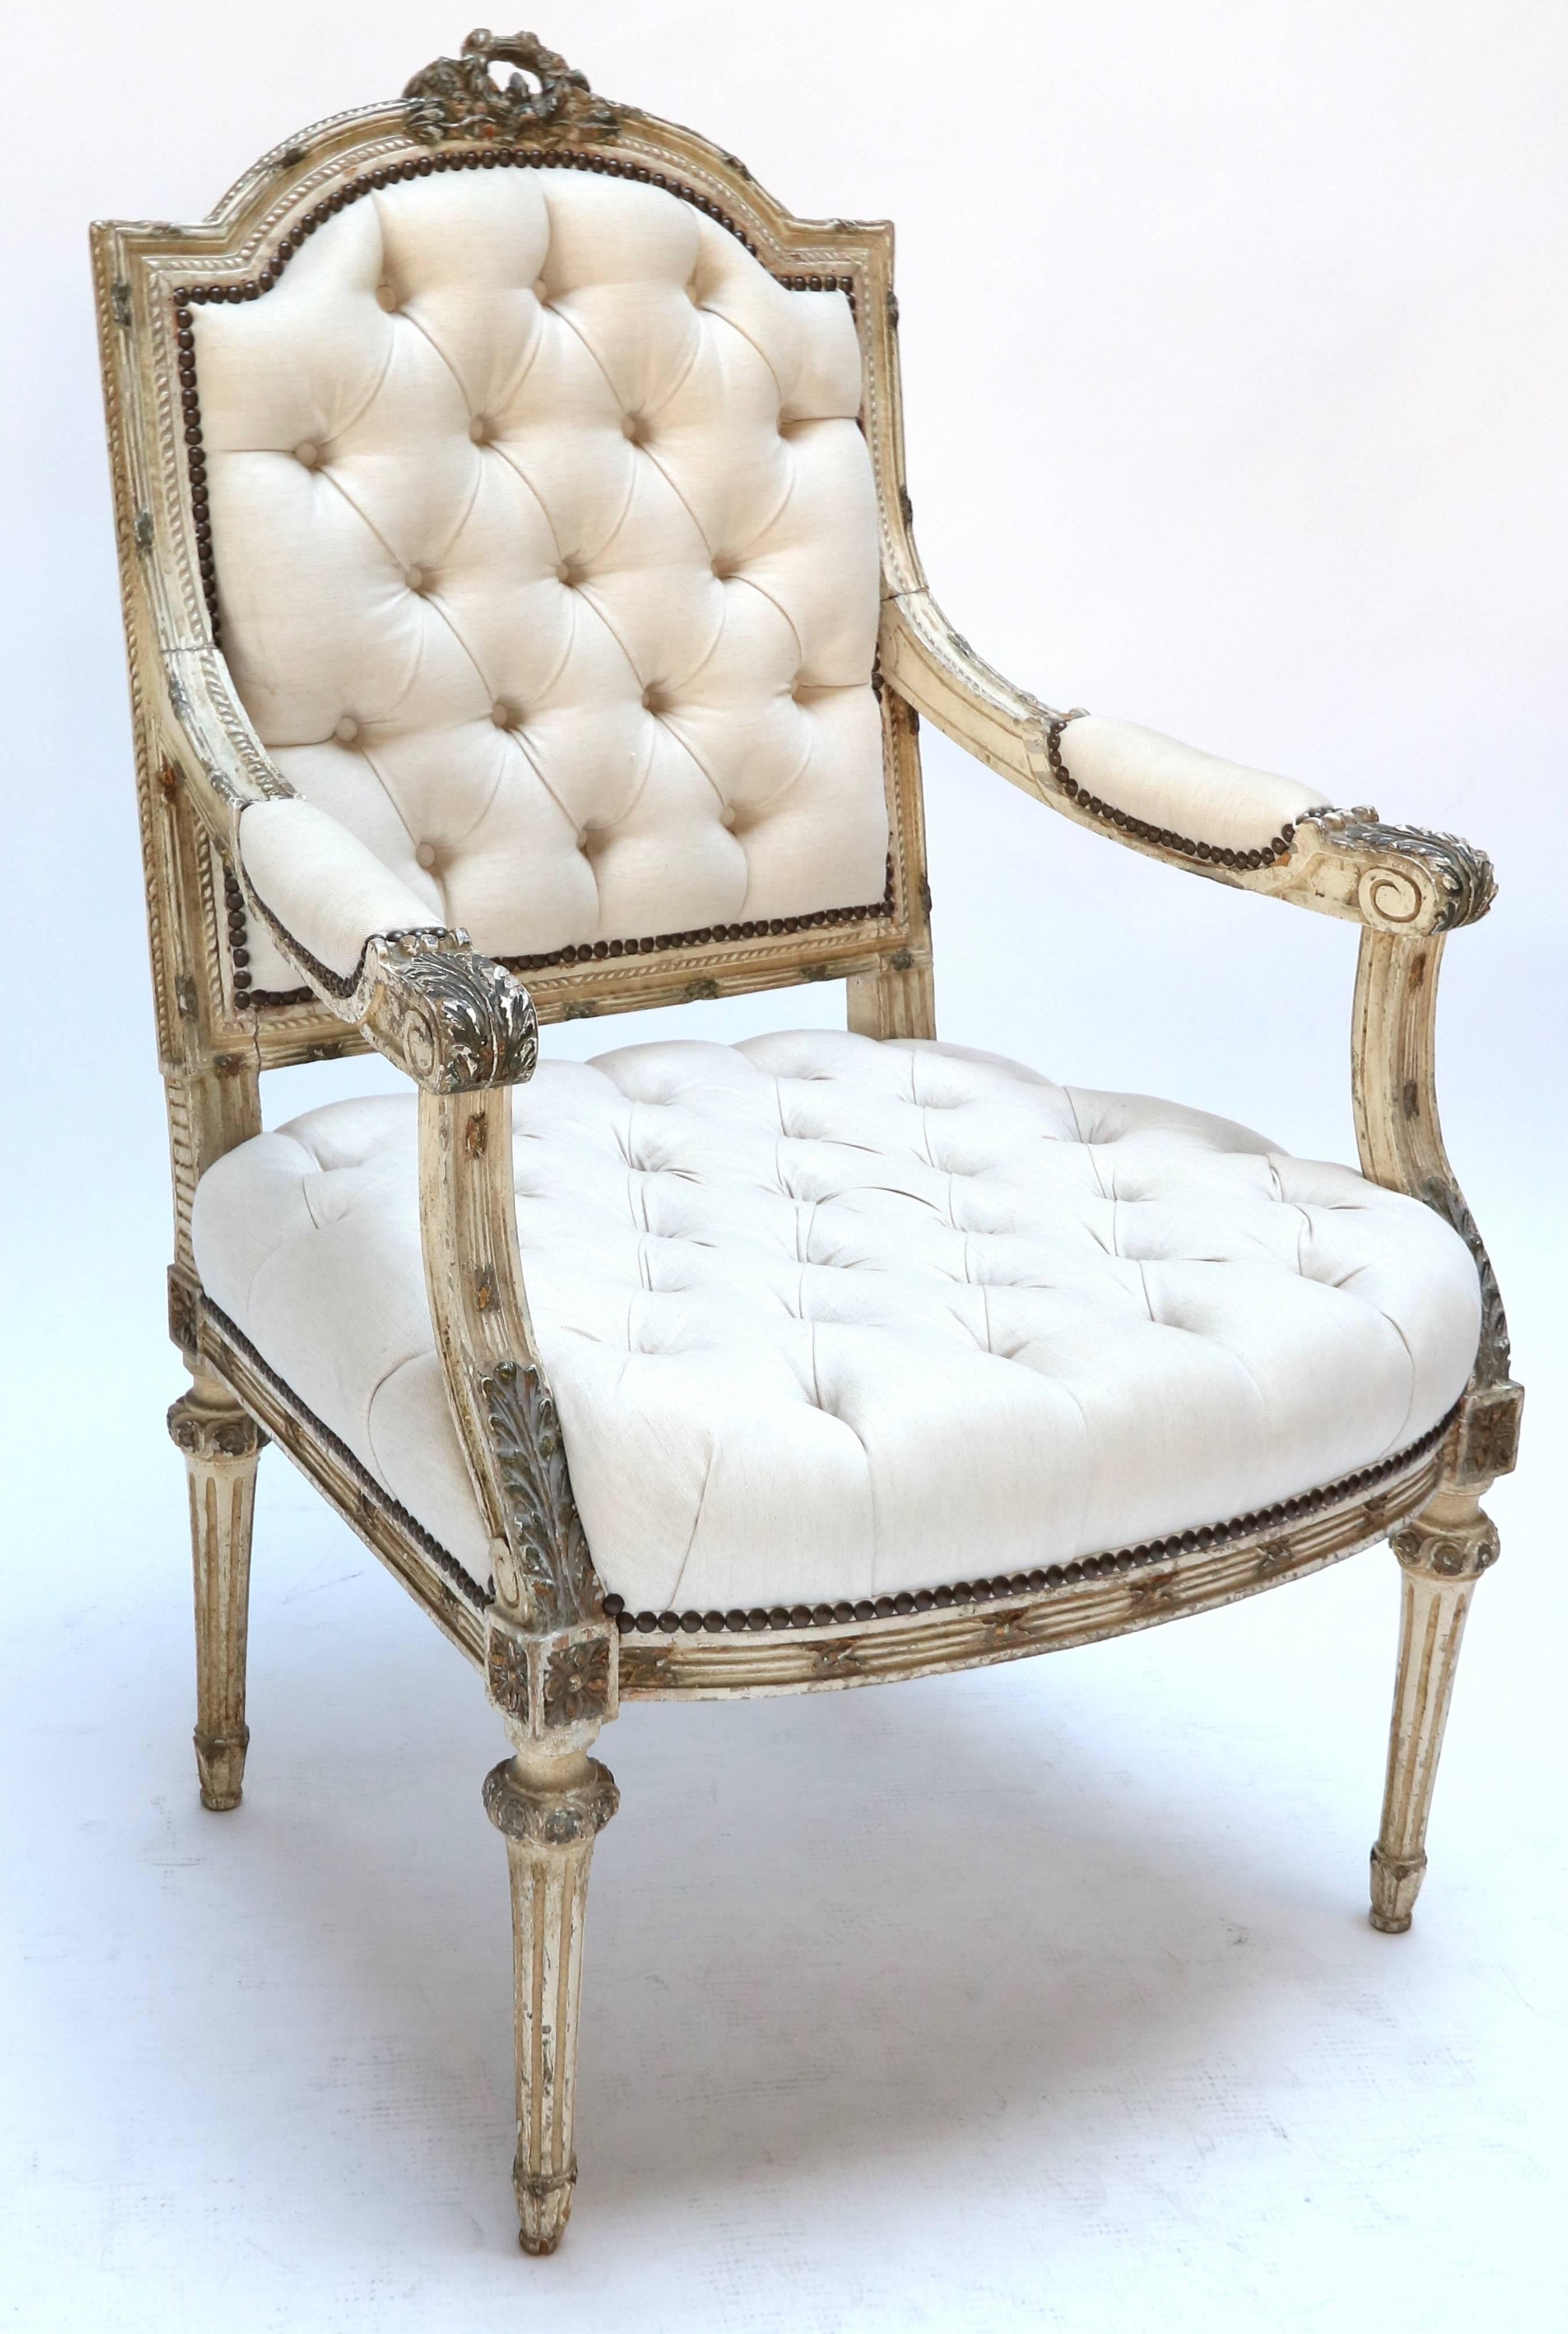 Pair of beautifully carved white Louis XVI style armchairs, upholstered in beige linen.